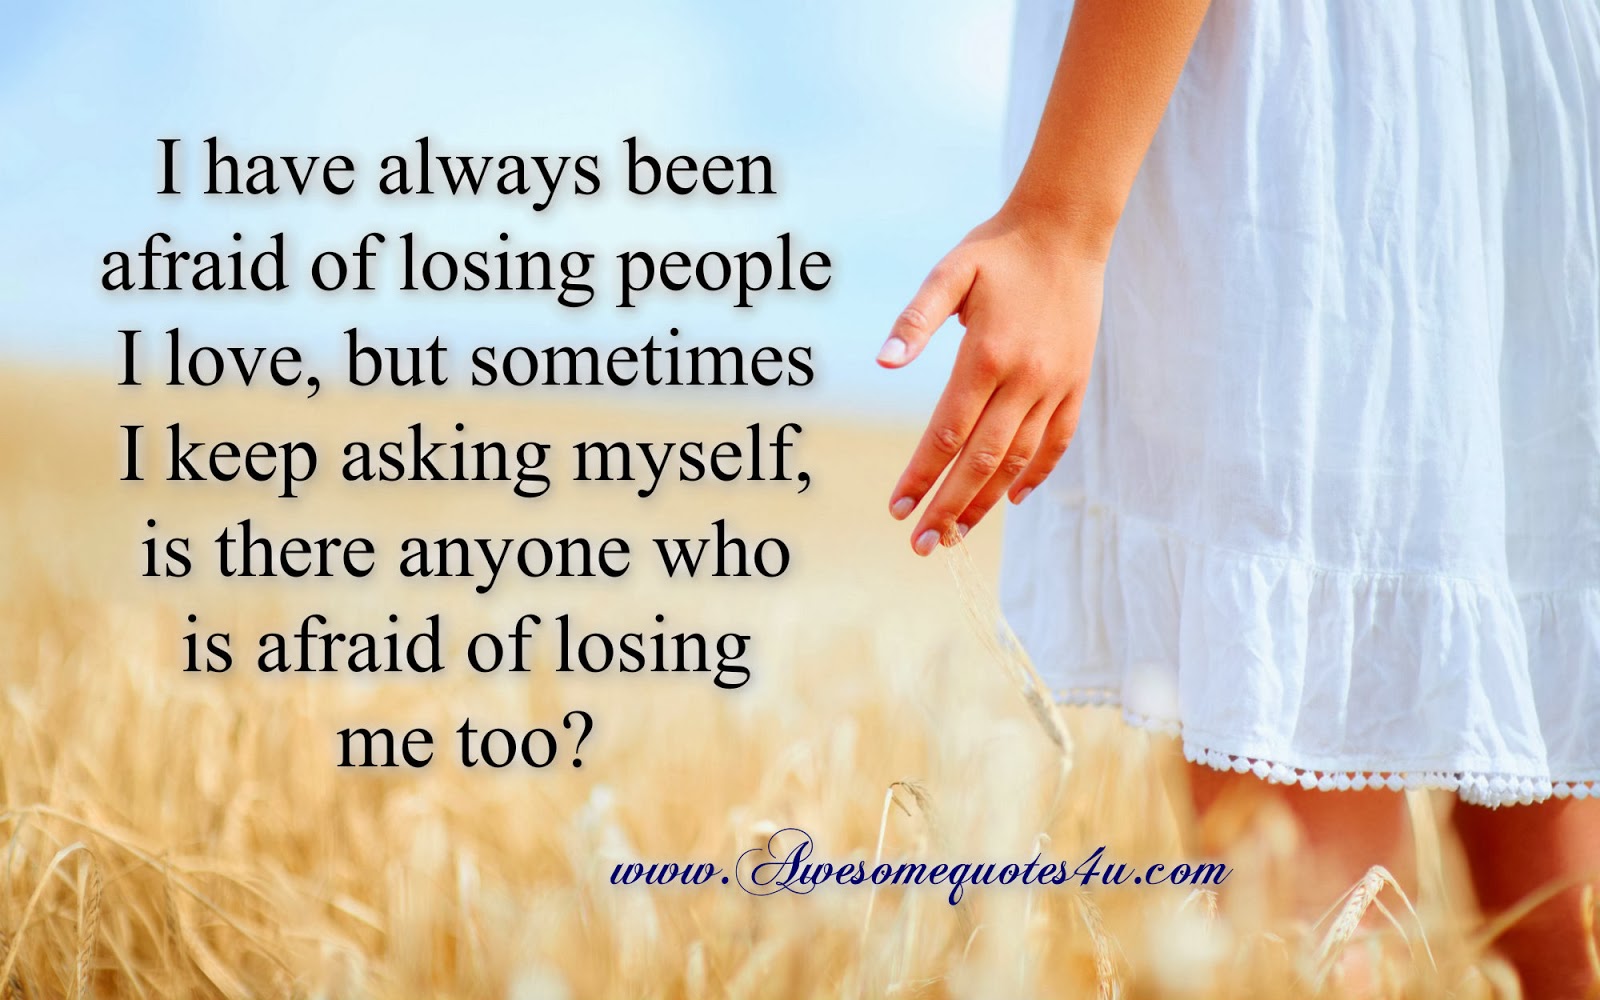 Awesome Quotes: I have always been afraid of losing people